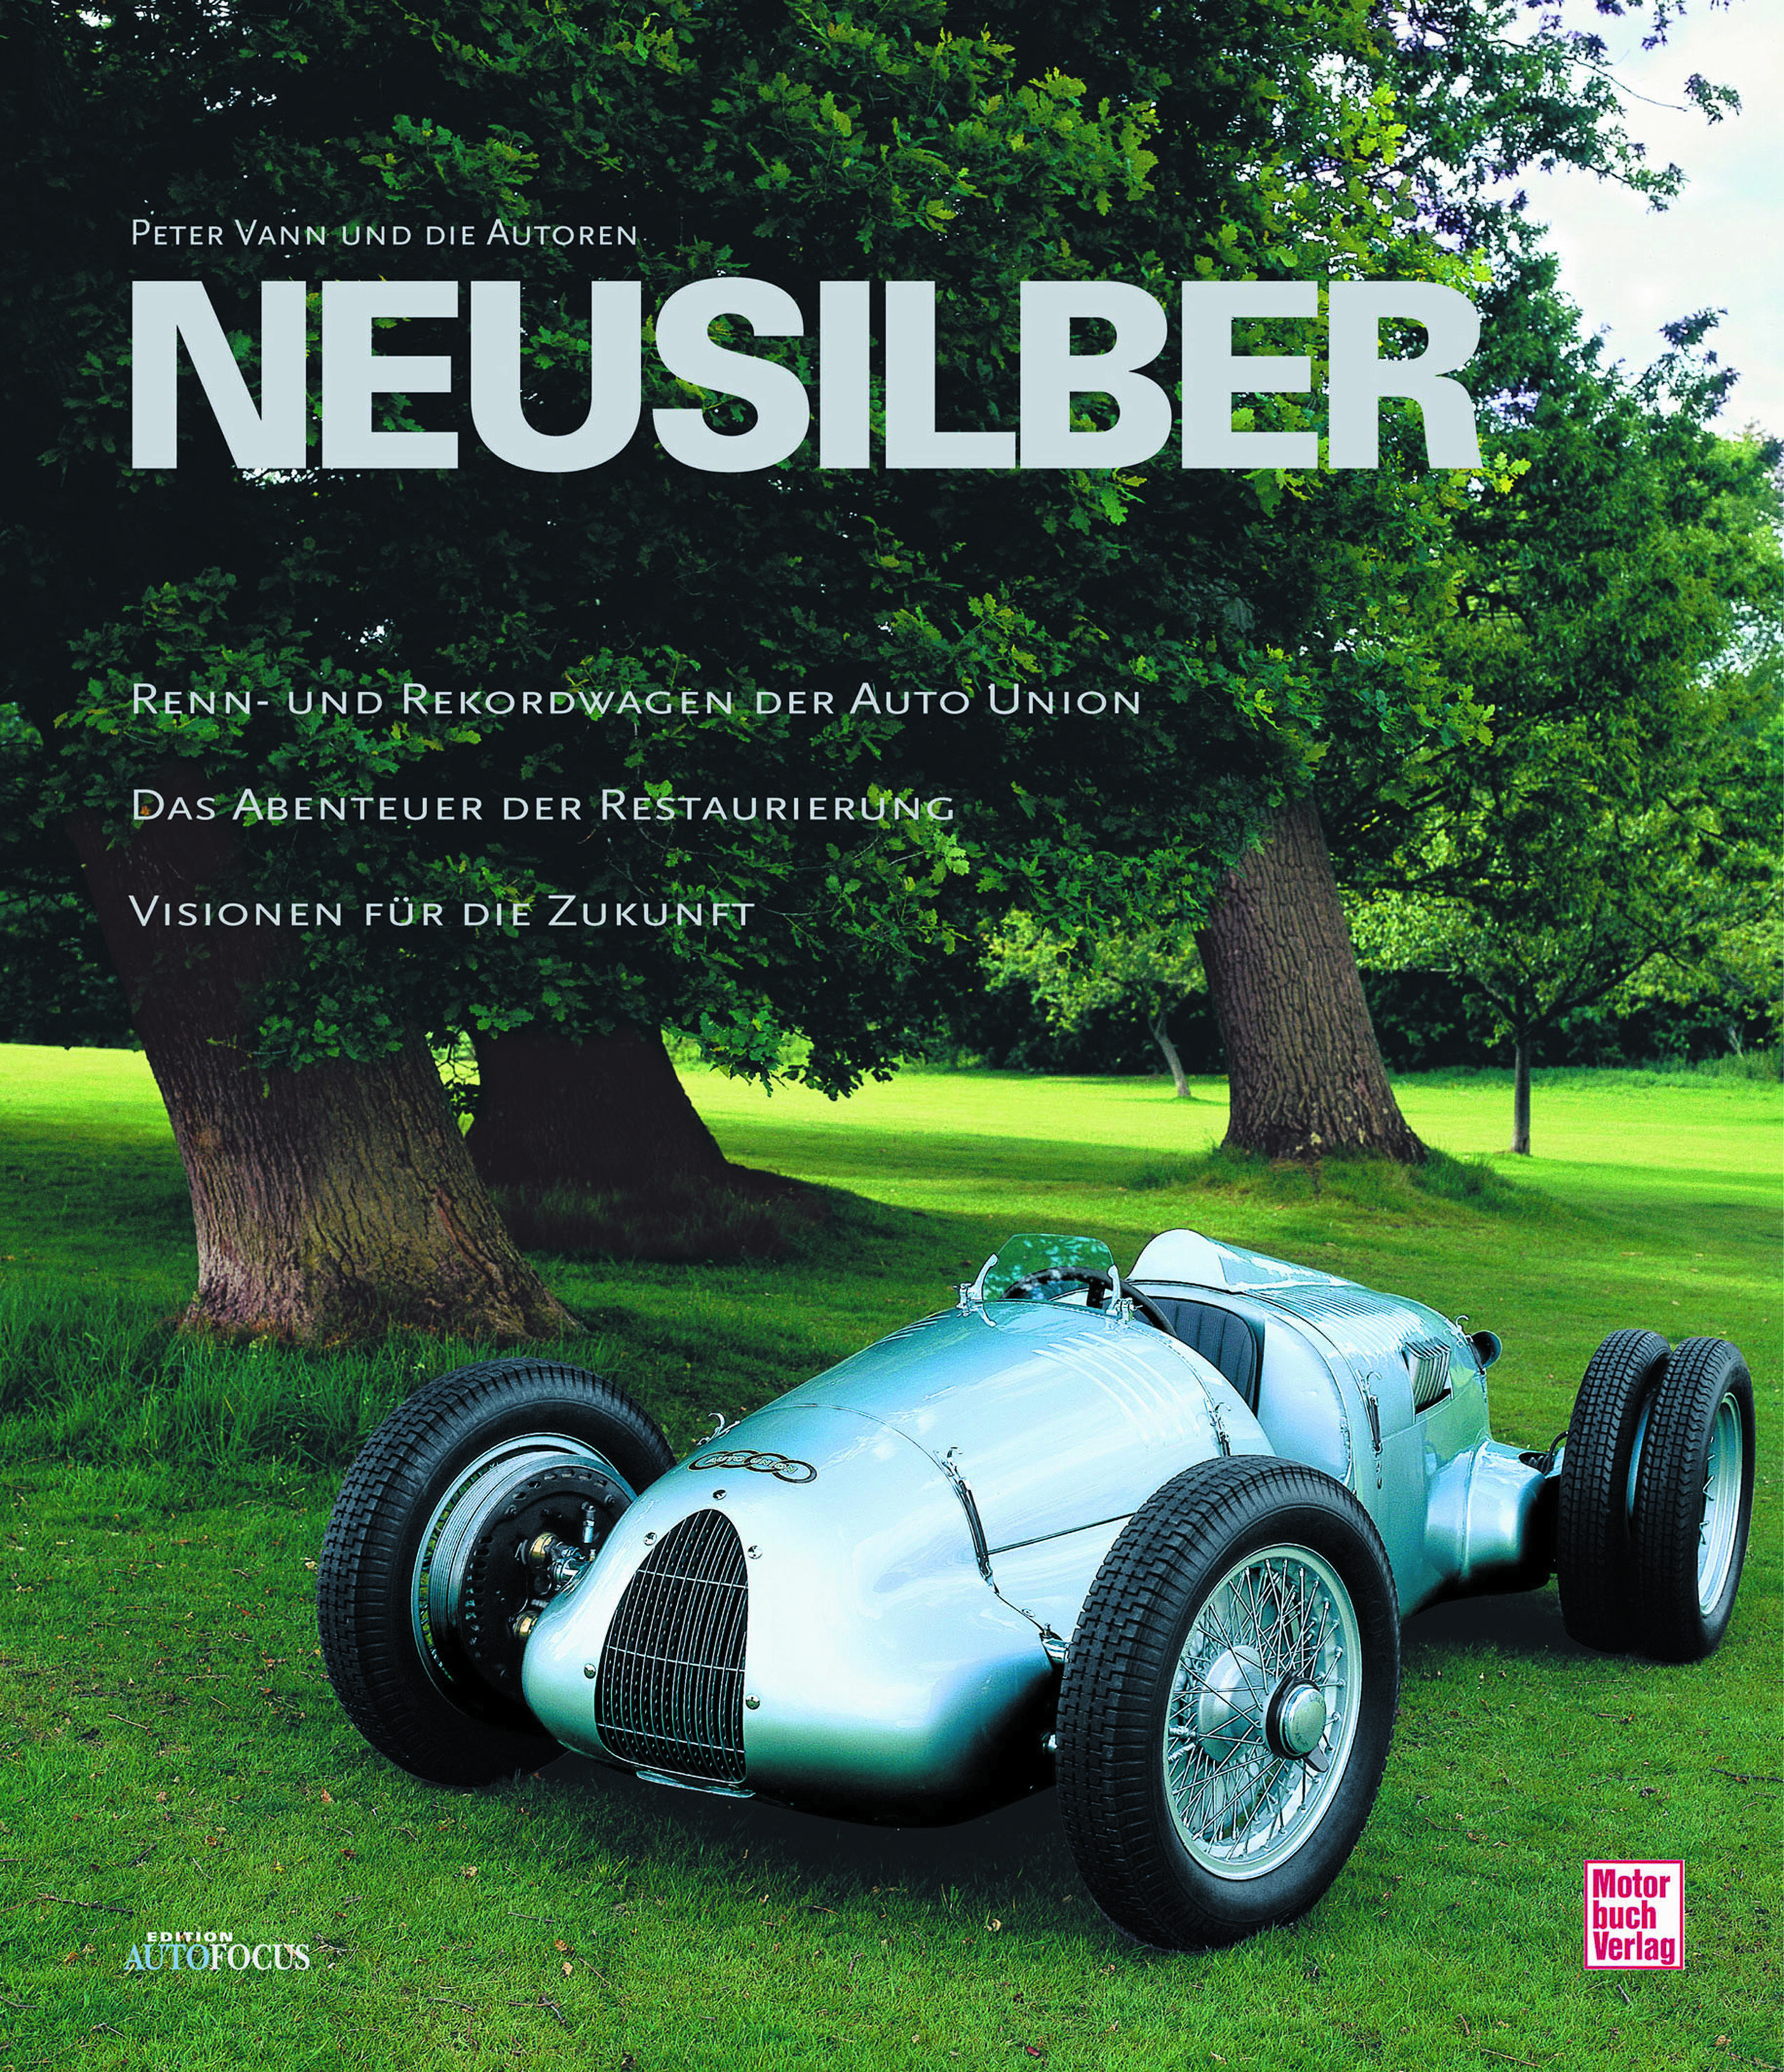 The book "Auto Union GP. Race and Record Cars", with photos by Peter Vann and text by Prof. Peter Kirchberg, Malte Jürgens, Wolfgang König, Max Nötzli, Mike Riedner and Herbert Völker, has 168 pages and is published by Motorbuch Verlag, Stuttgart